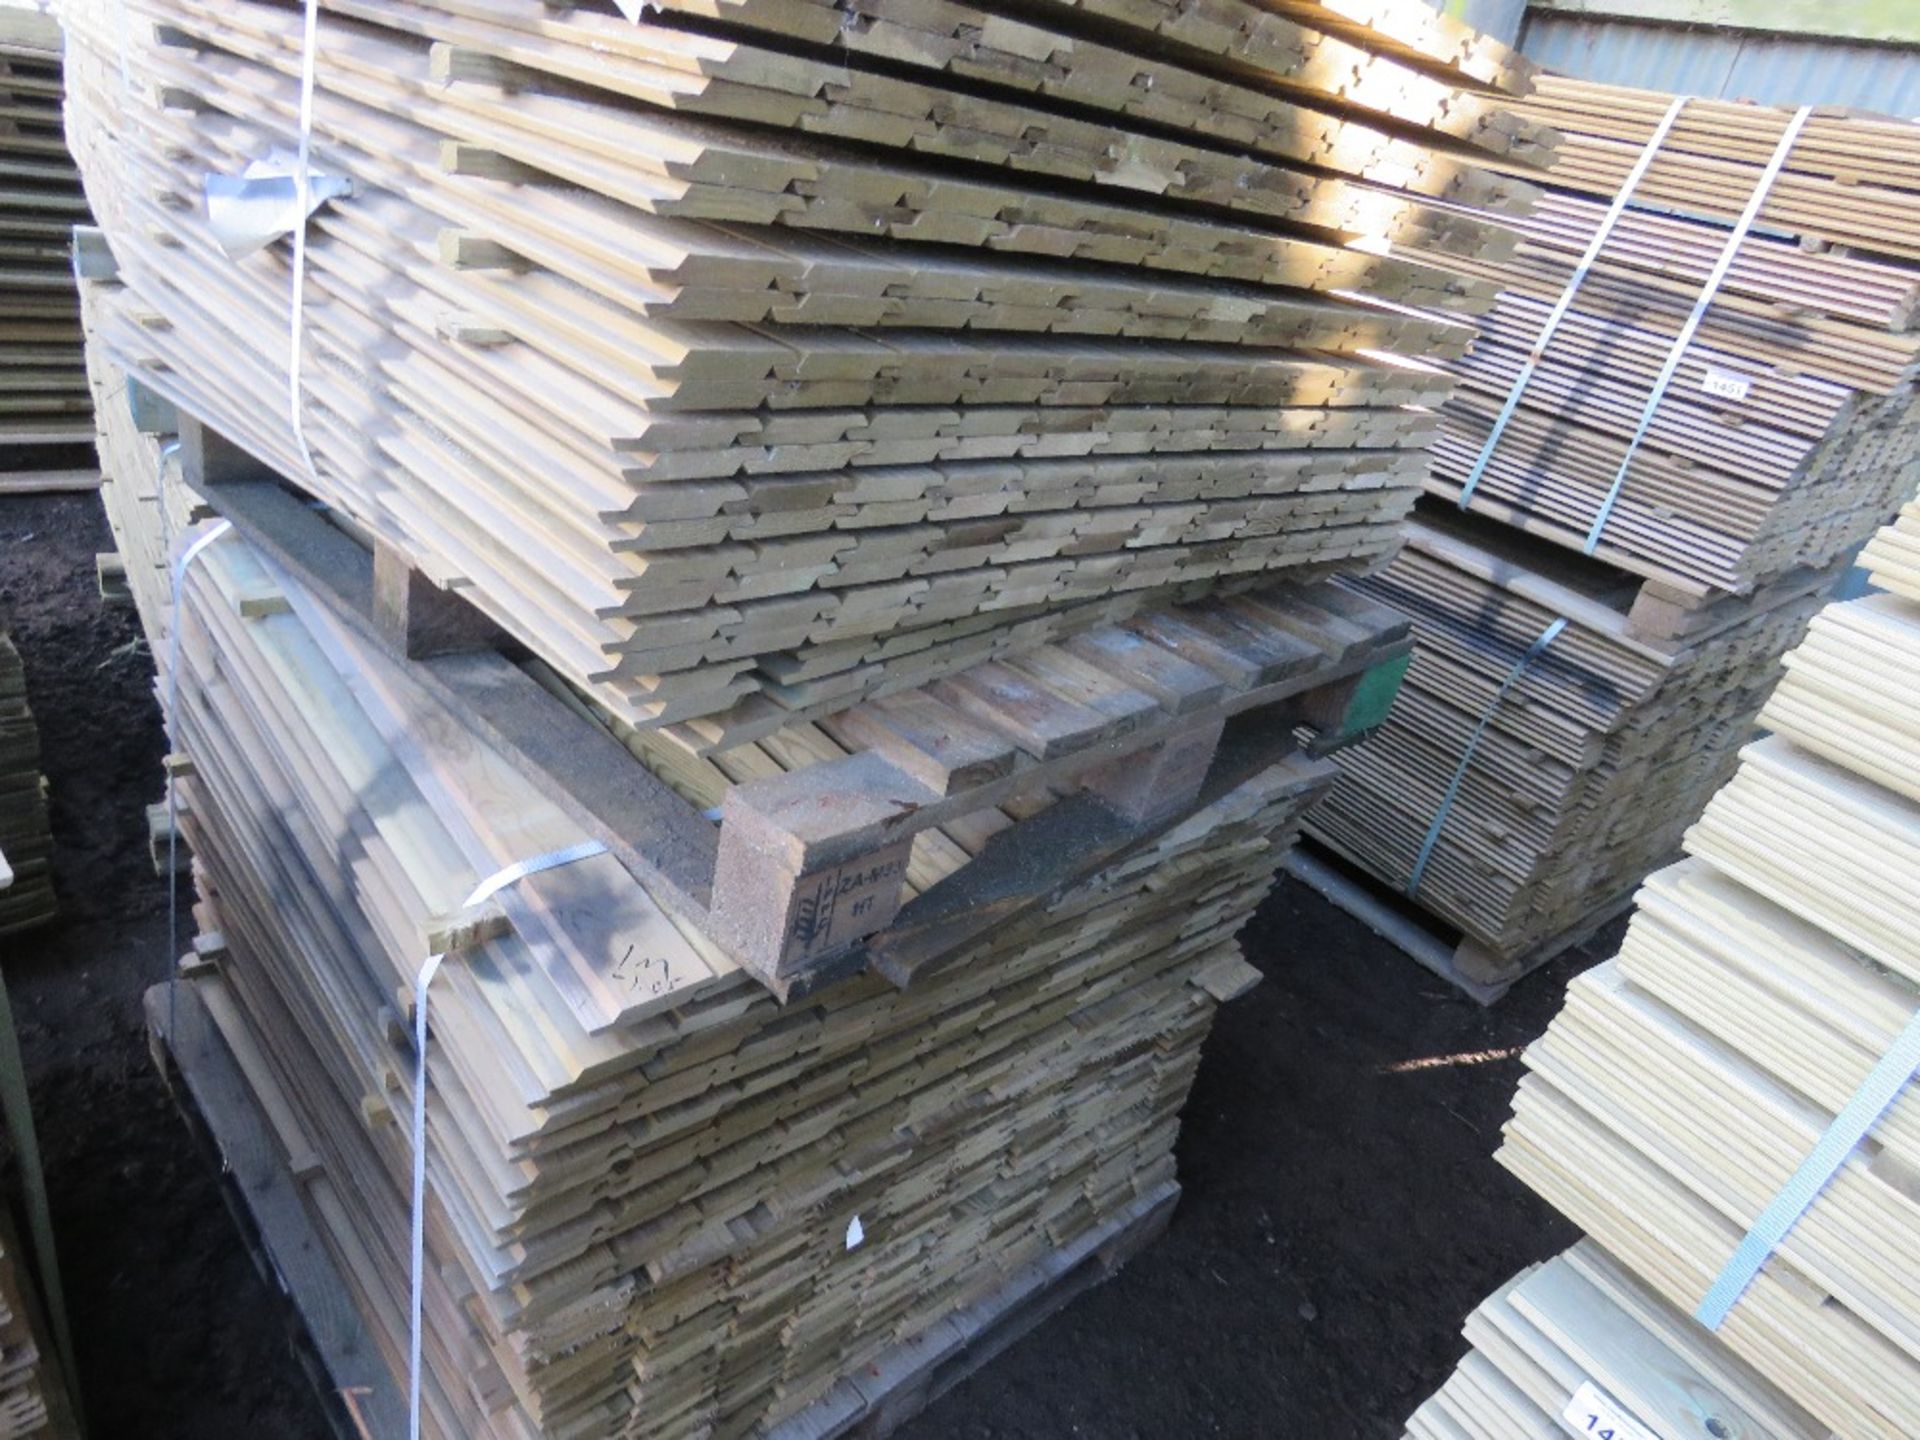 2 X PALLETS OF SHIPLAP PRESSURE TREATED FENCE CLADDING TIMBER BOARDS. 1.M-1.05M LENGTH X 95MM WIDTH